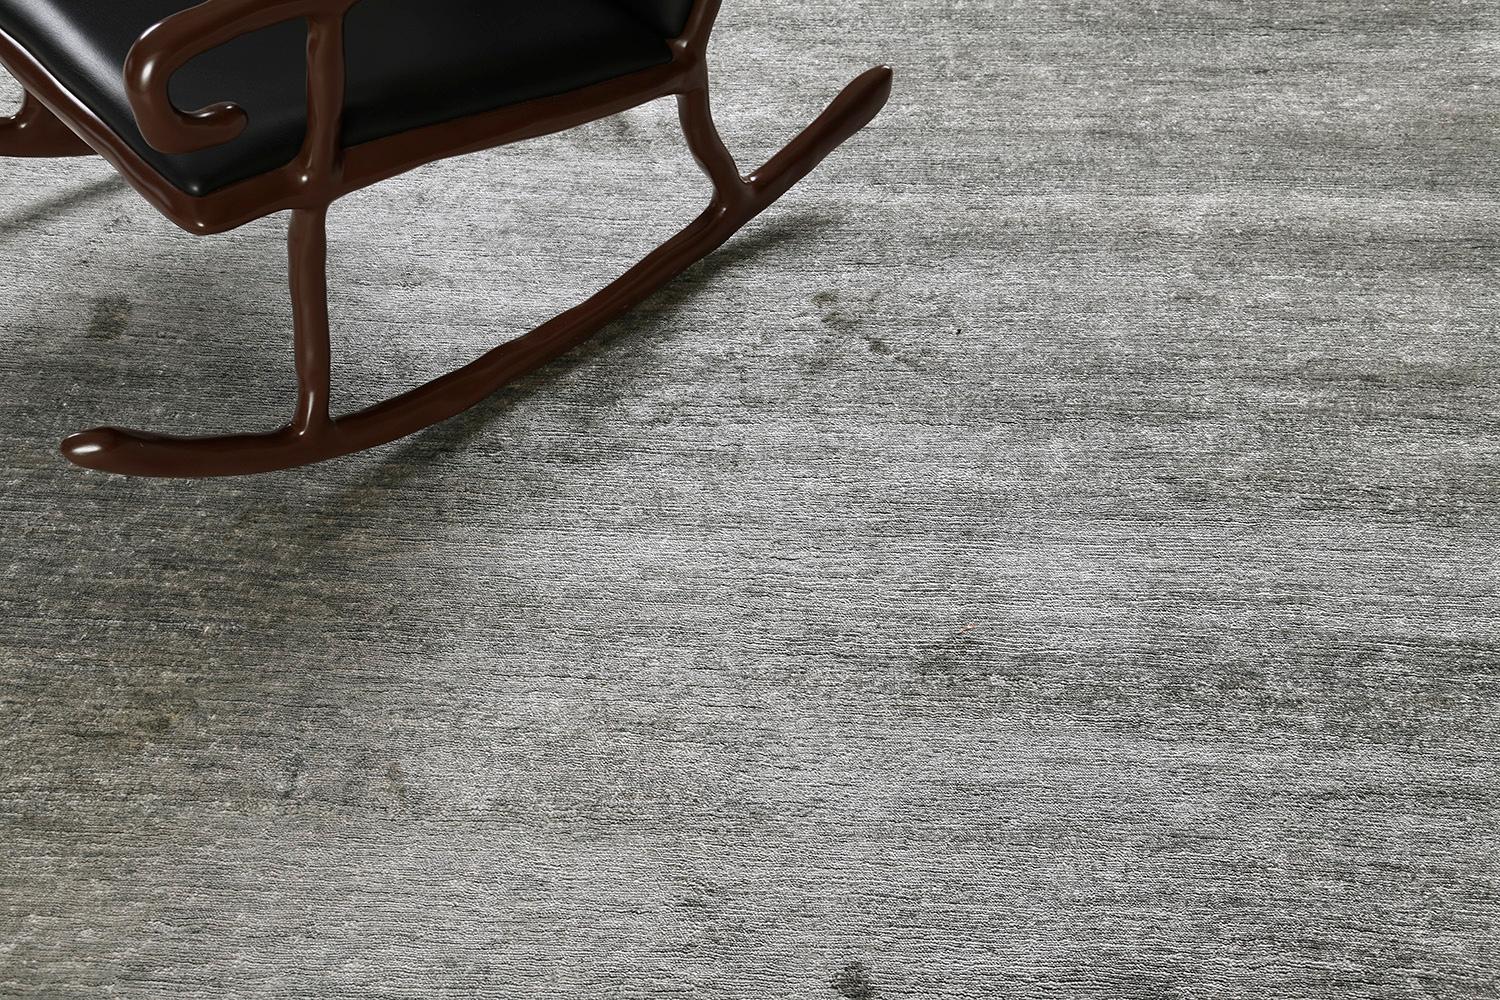 Dara' is a most sought after rug in Elan Collection in the mesmerizing gray shade. Its simplicity does not take away fromthe rug's luxurious quality and beautiful sheen made of bamboo silk. Dara is a fabulous rug for any design space.

Rug Number